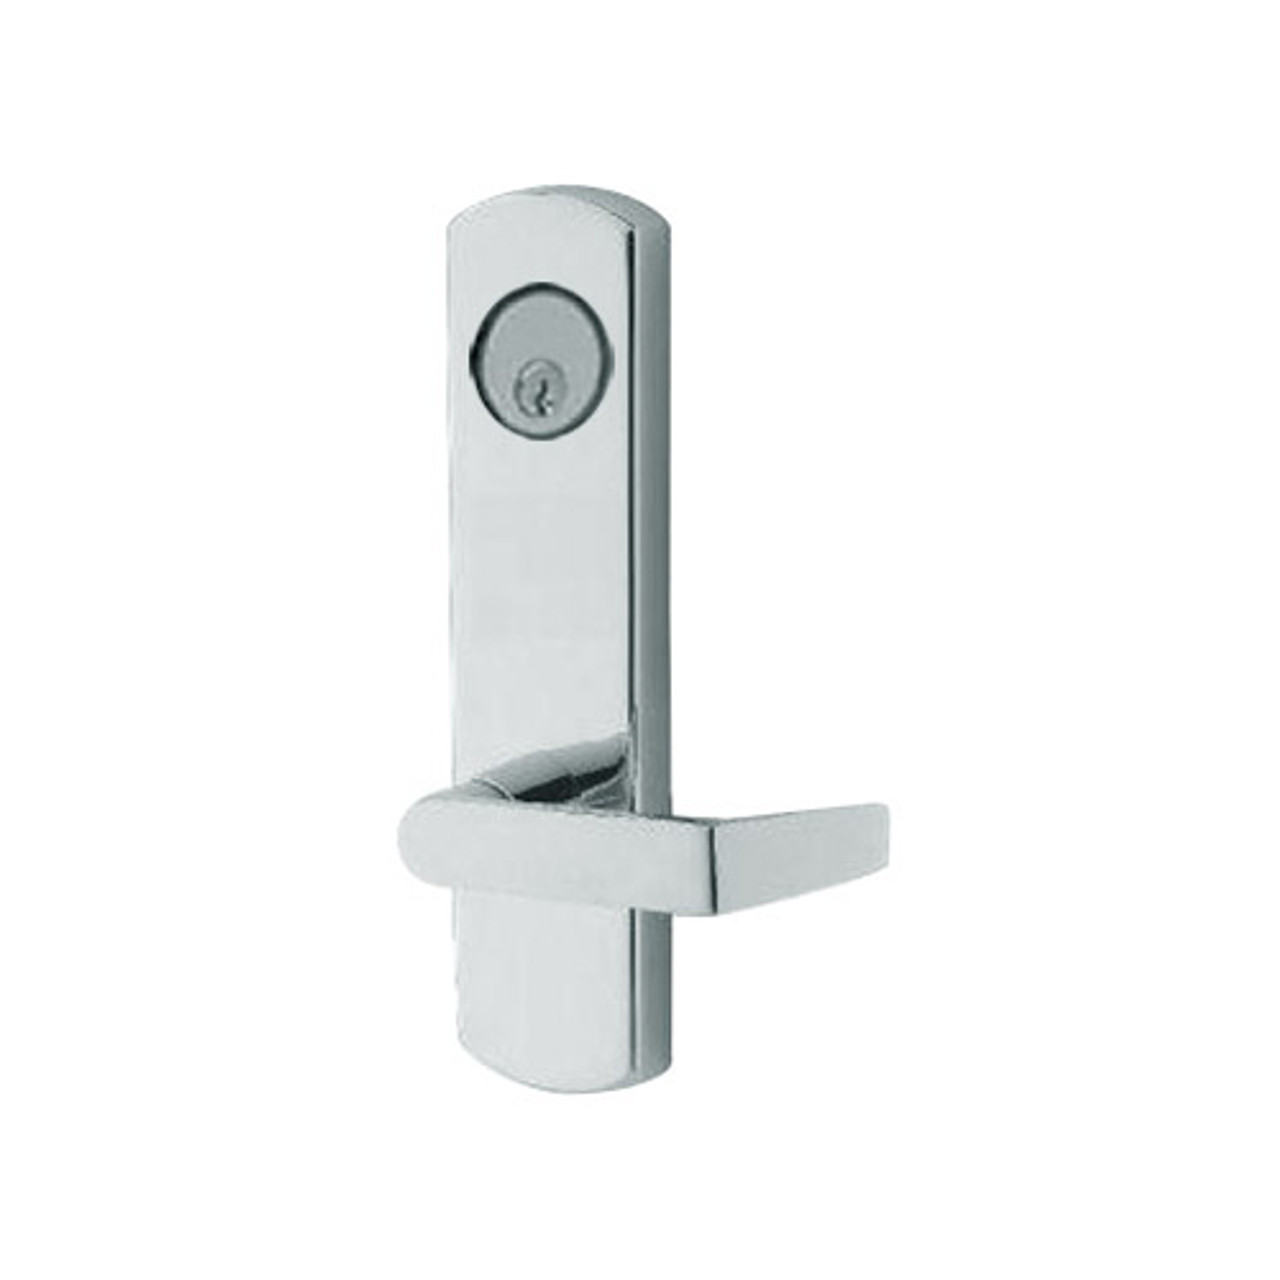 3080E-03-0-97-35 US32 Adams Rite Electrified Entry Trim with Square Lever in Bright Stainless Finish